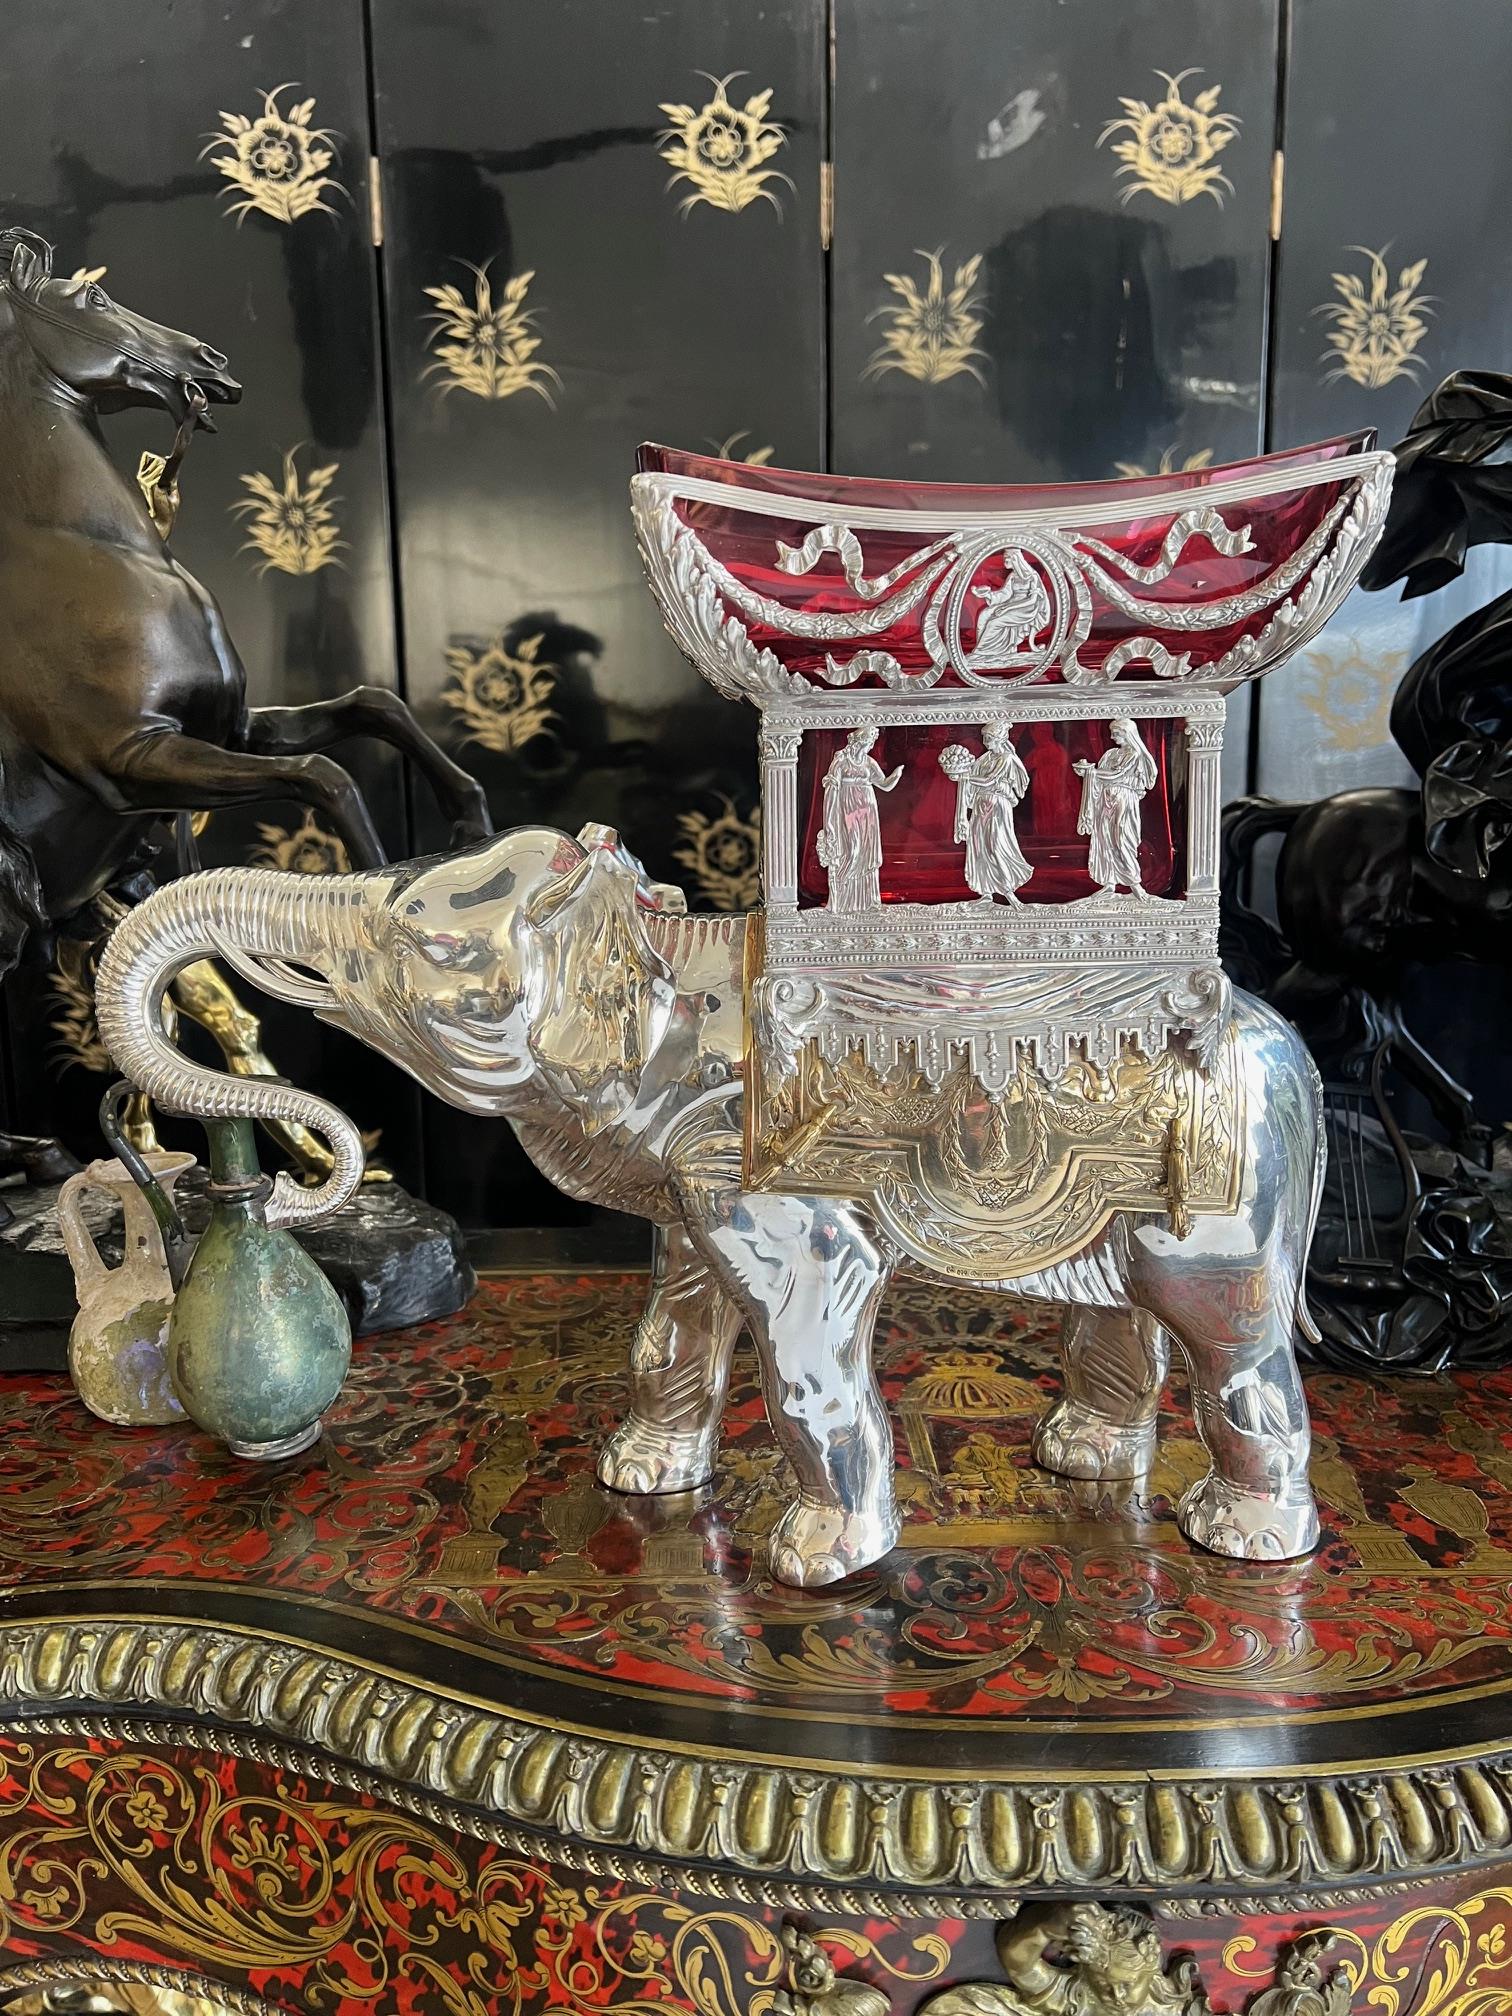 A LARGE SILVER, SILVER GILT AND RUBY GLASS ELEPHANT VASE, GERMAN, 20TH CENTURY - Image 2 of 7